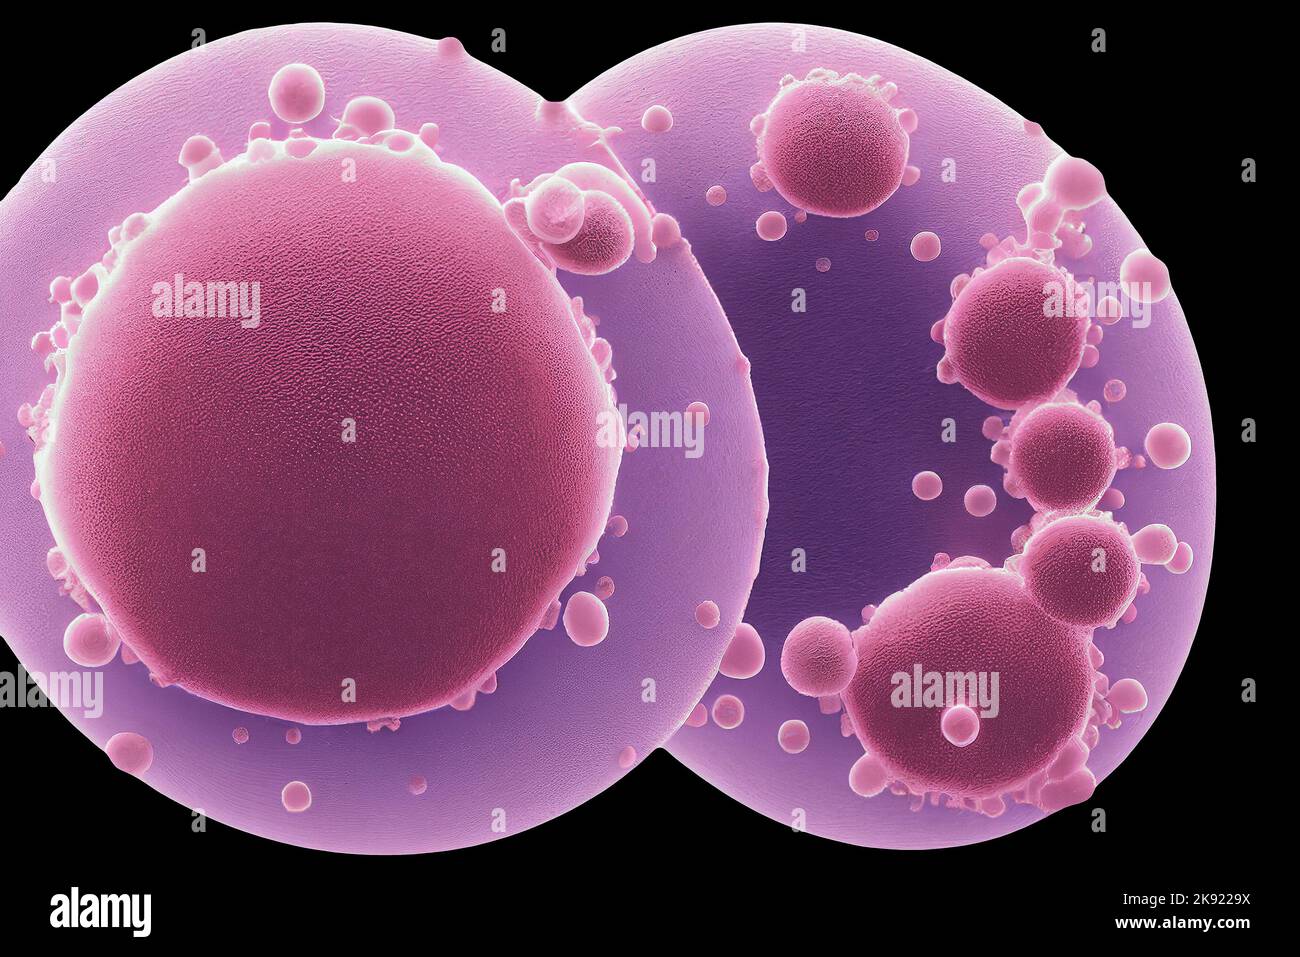 Viral Particles Budding Away from Infected Cells Stock Photo